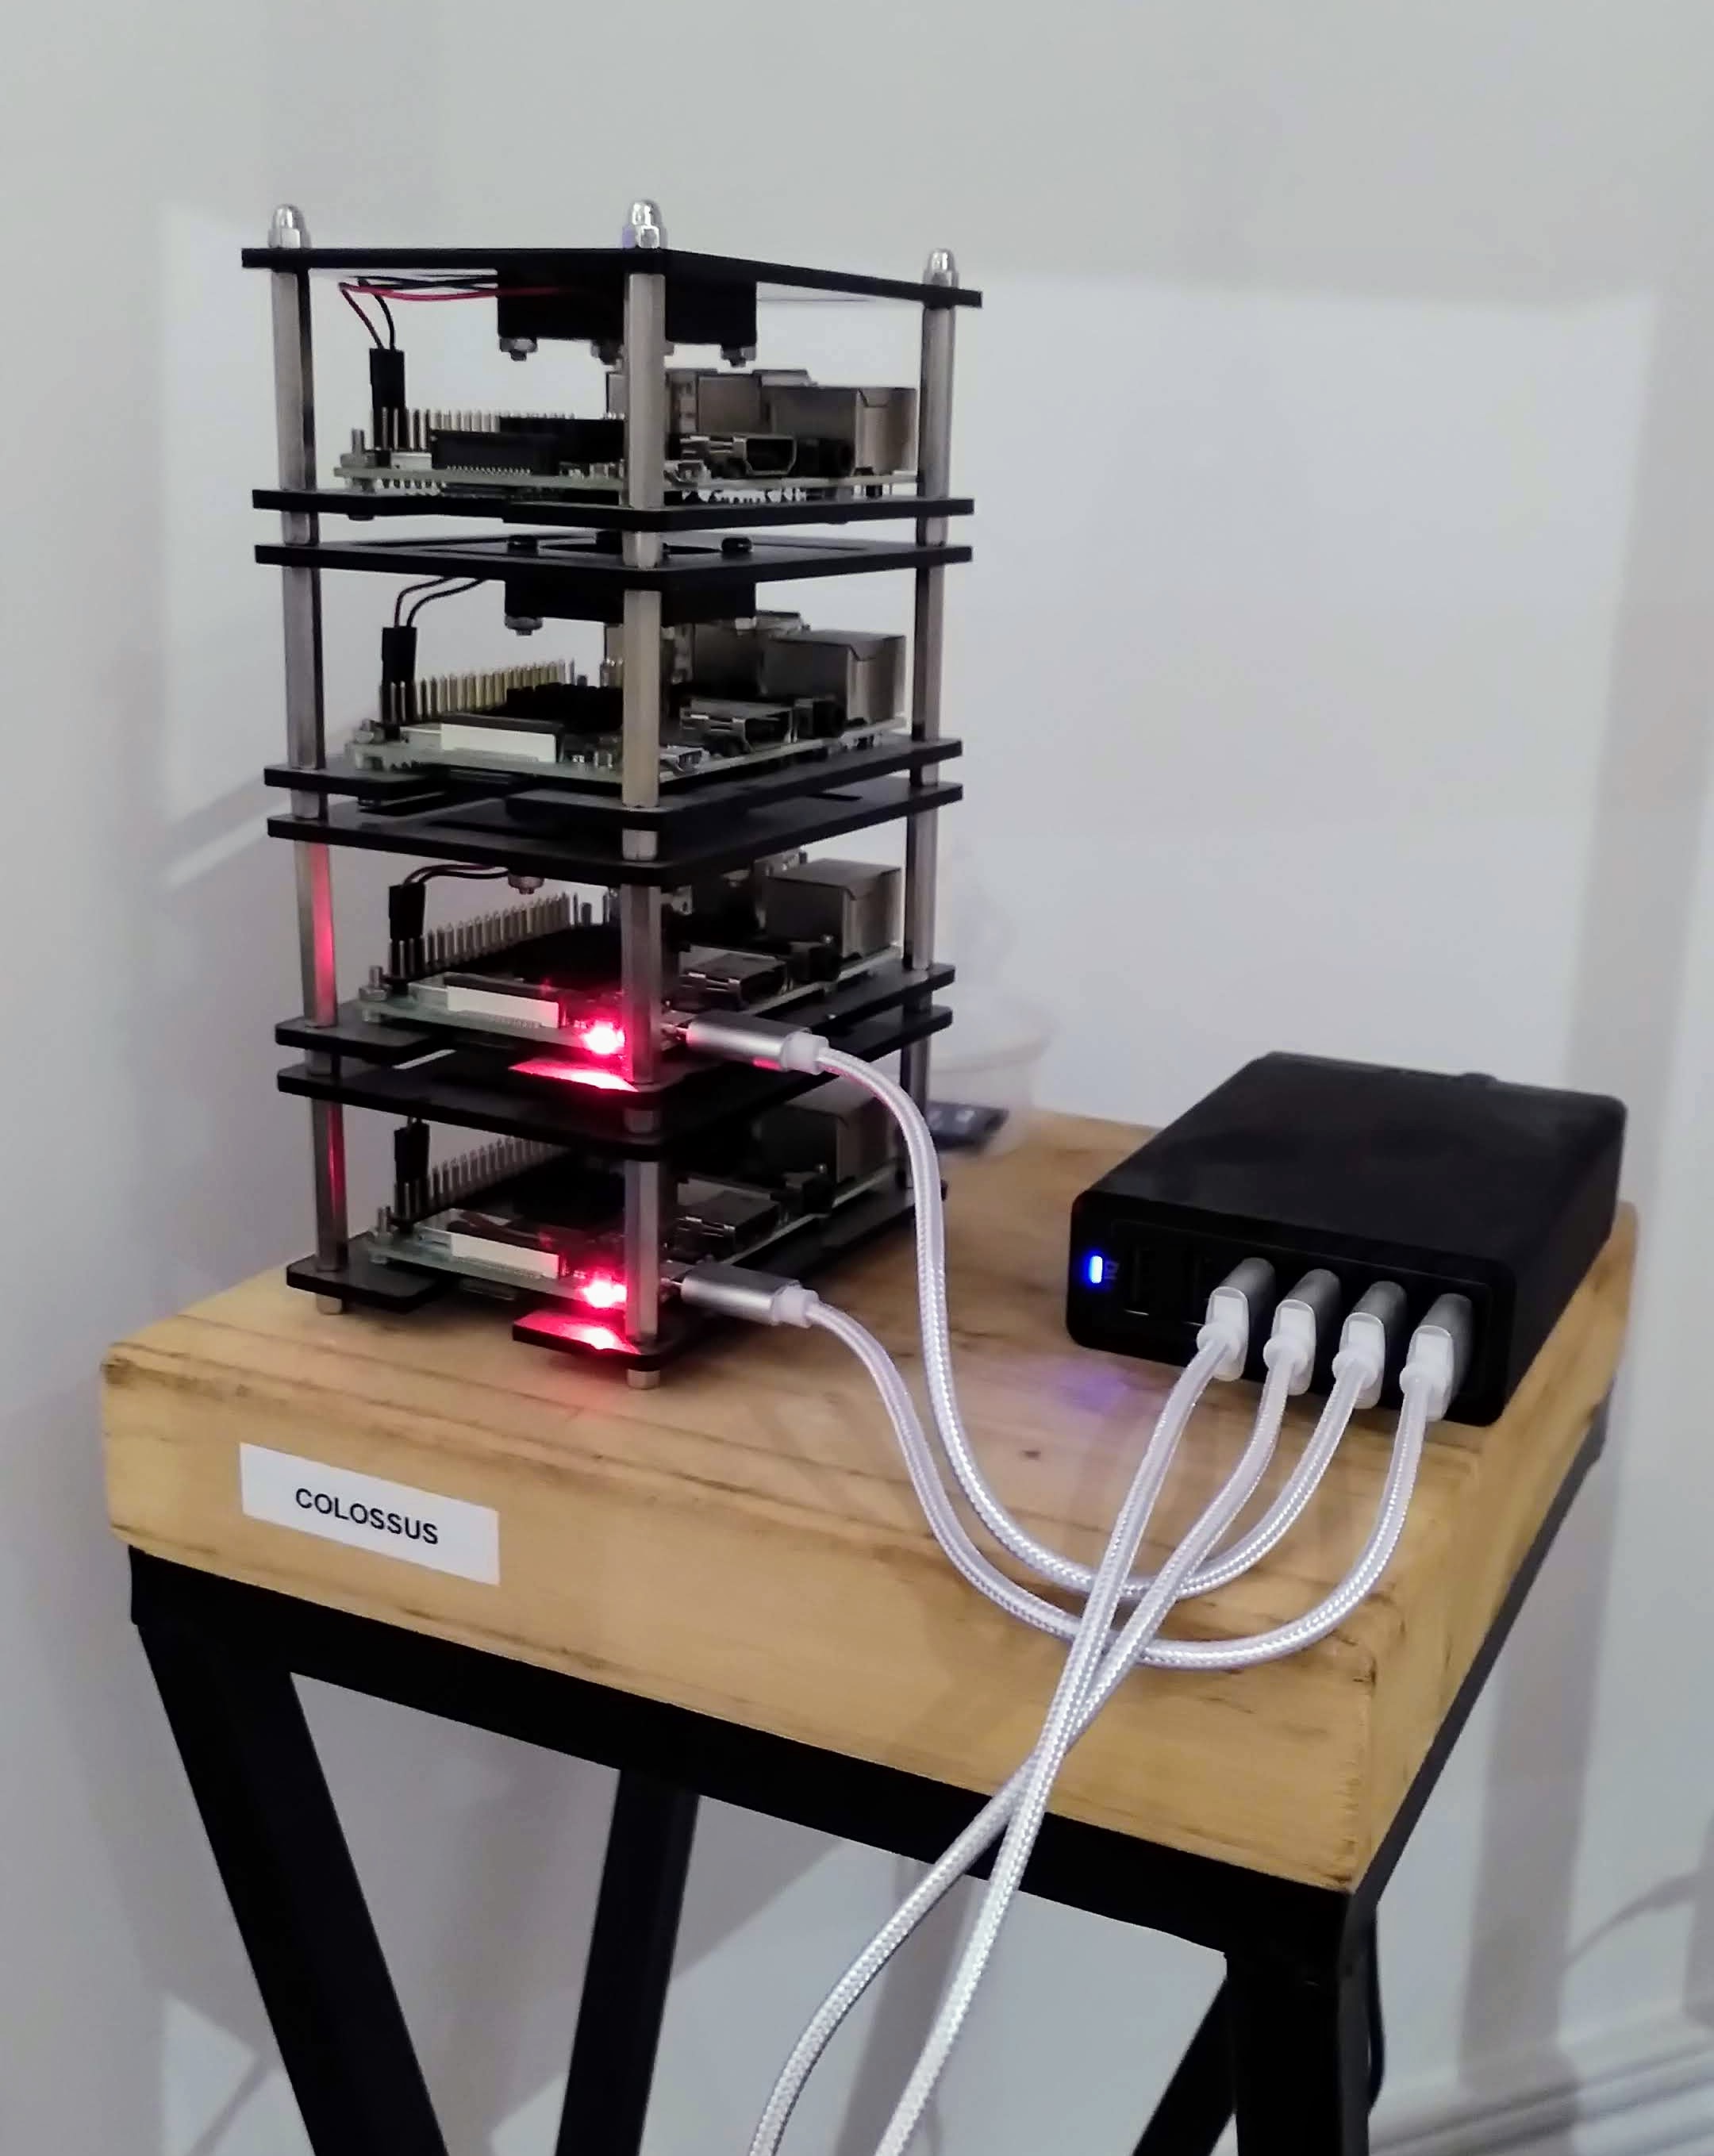 Colossus, a tiny stack of 4 Raspberry Pi computers. 2 of them have little red lights on to indicate that they are powered.